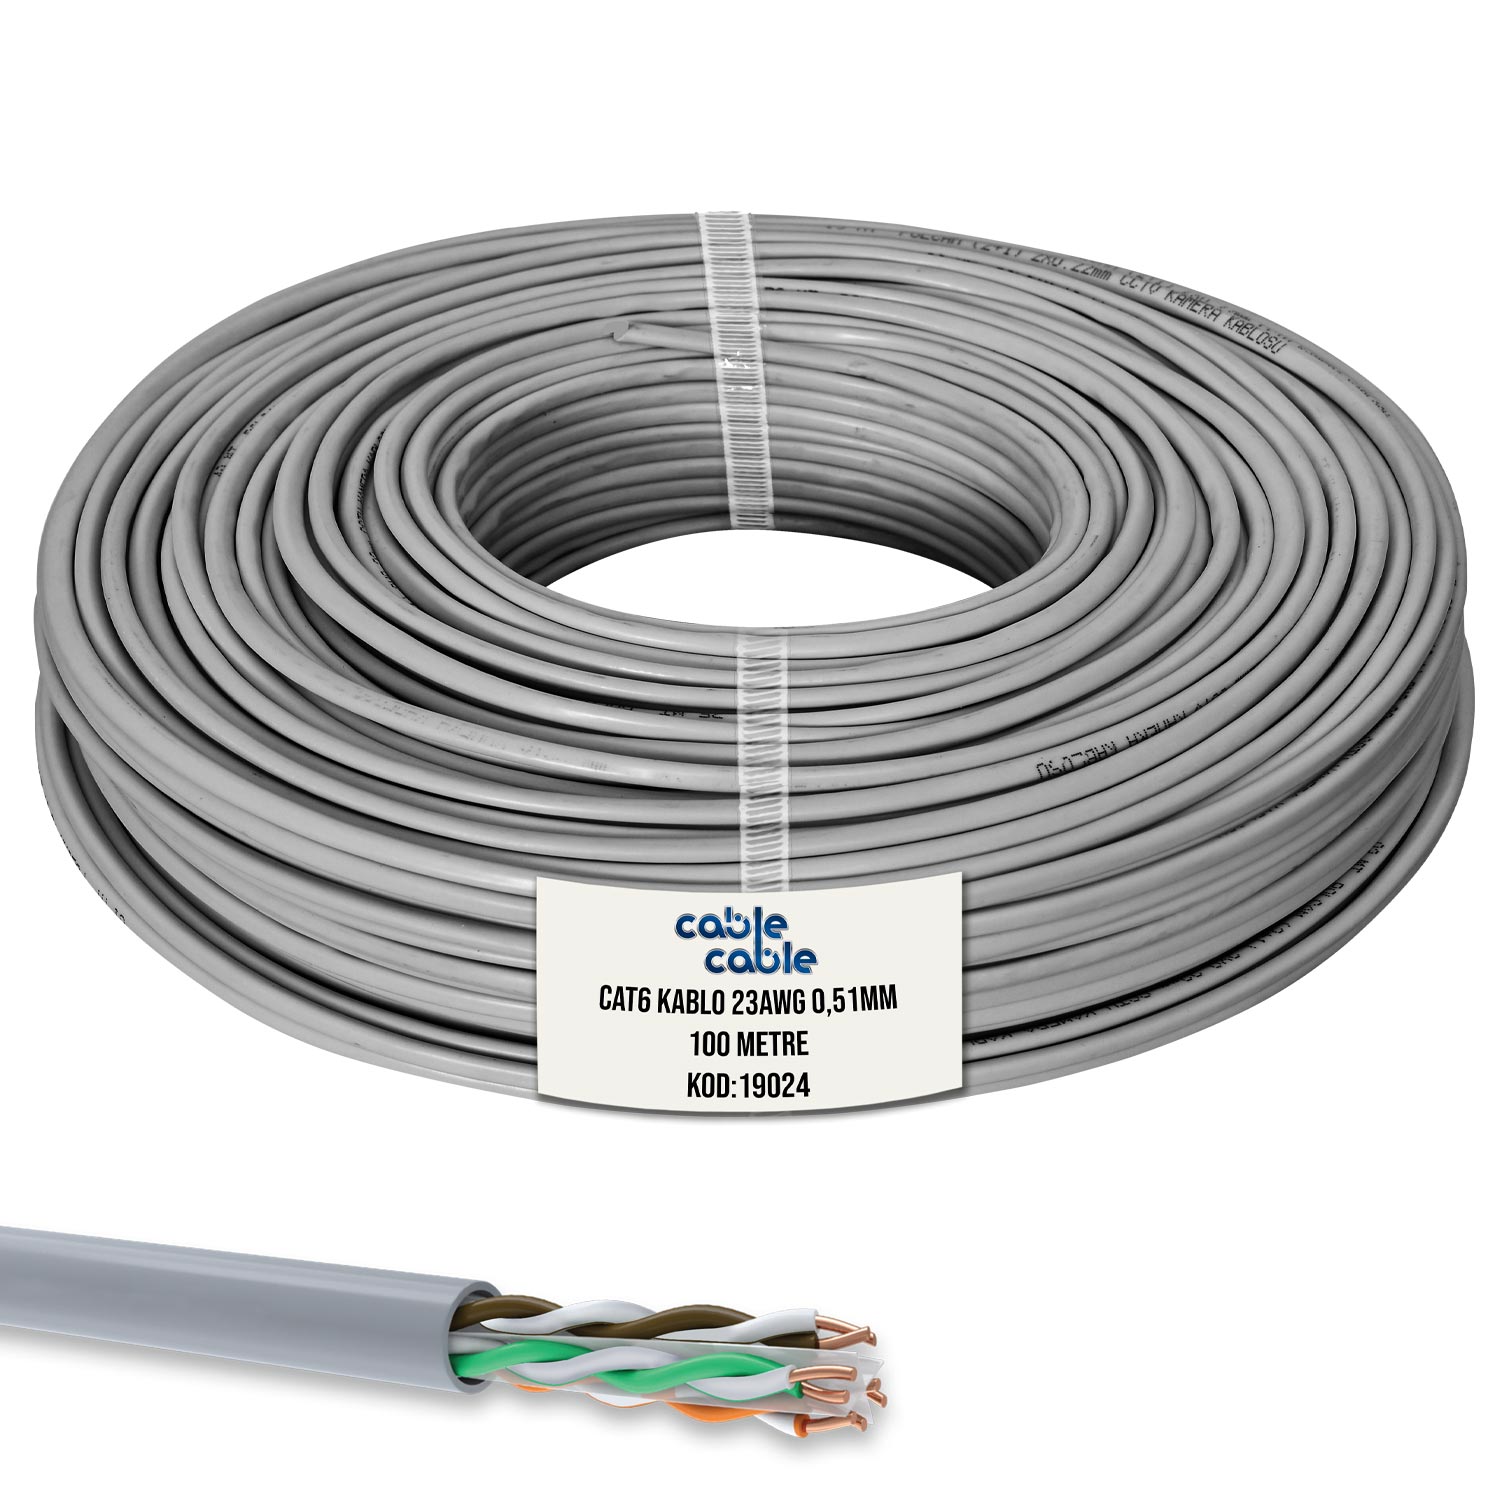 CAT6 KABLO 23AWG 0.51MM 100MT CABLECABLE